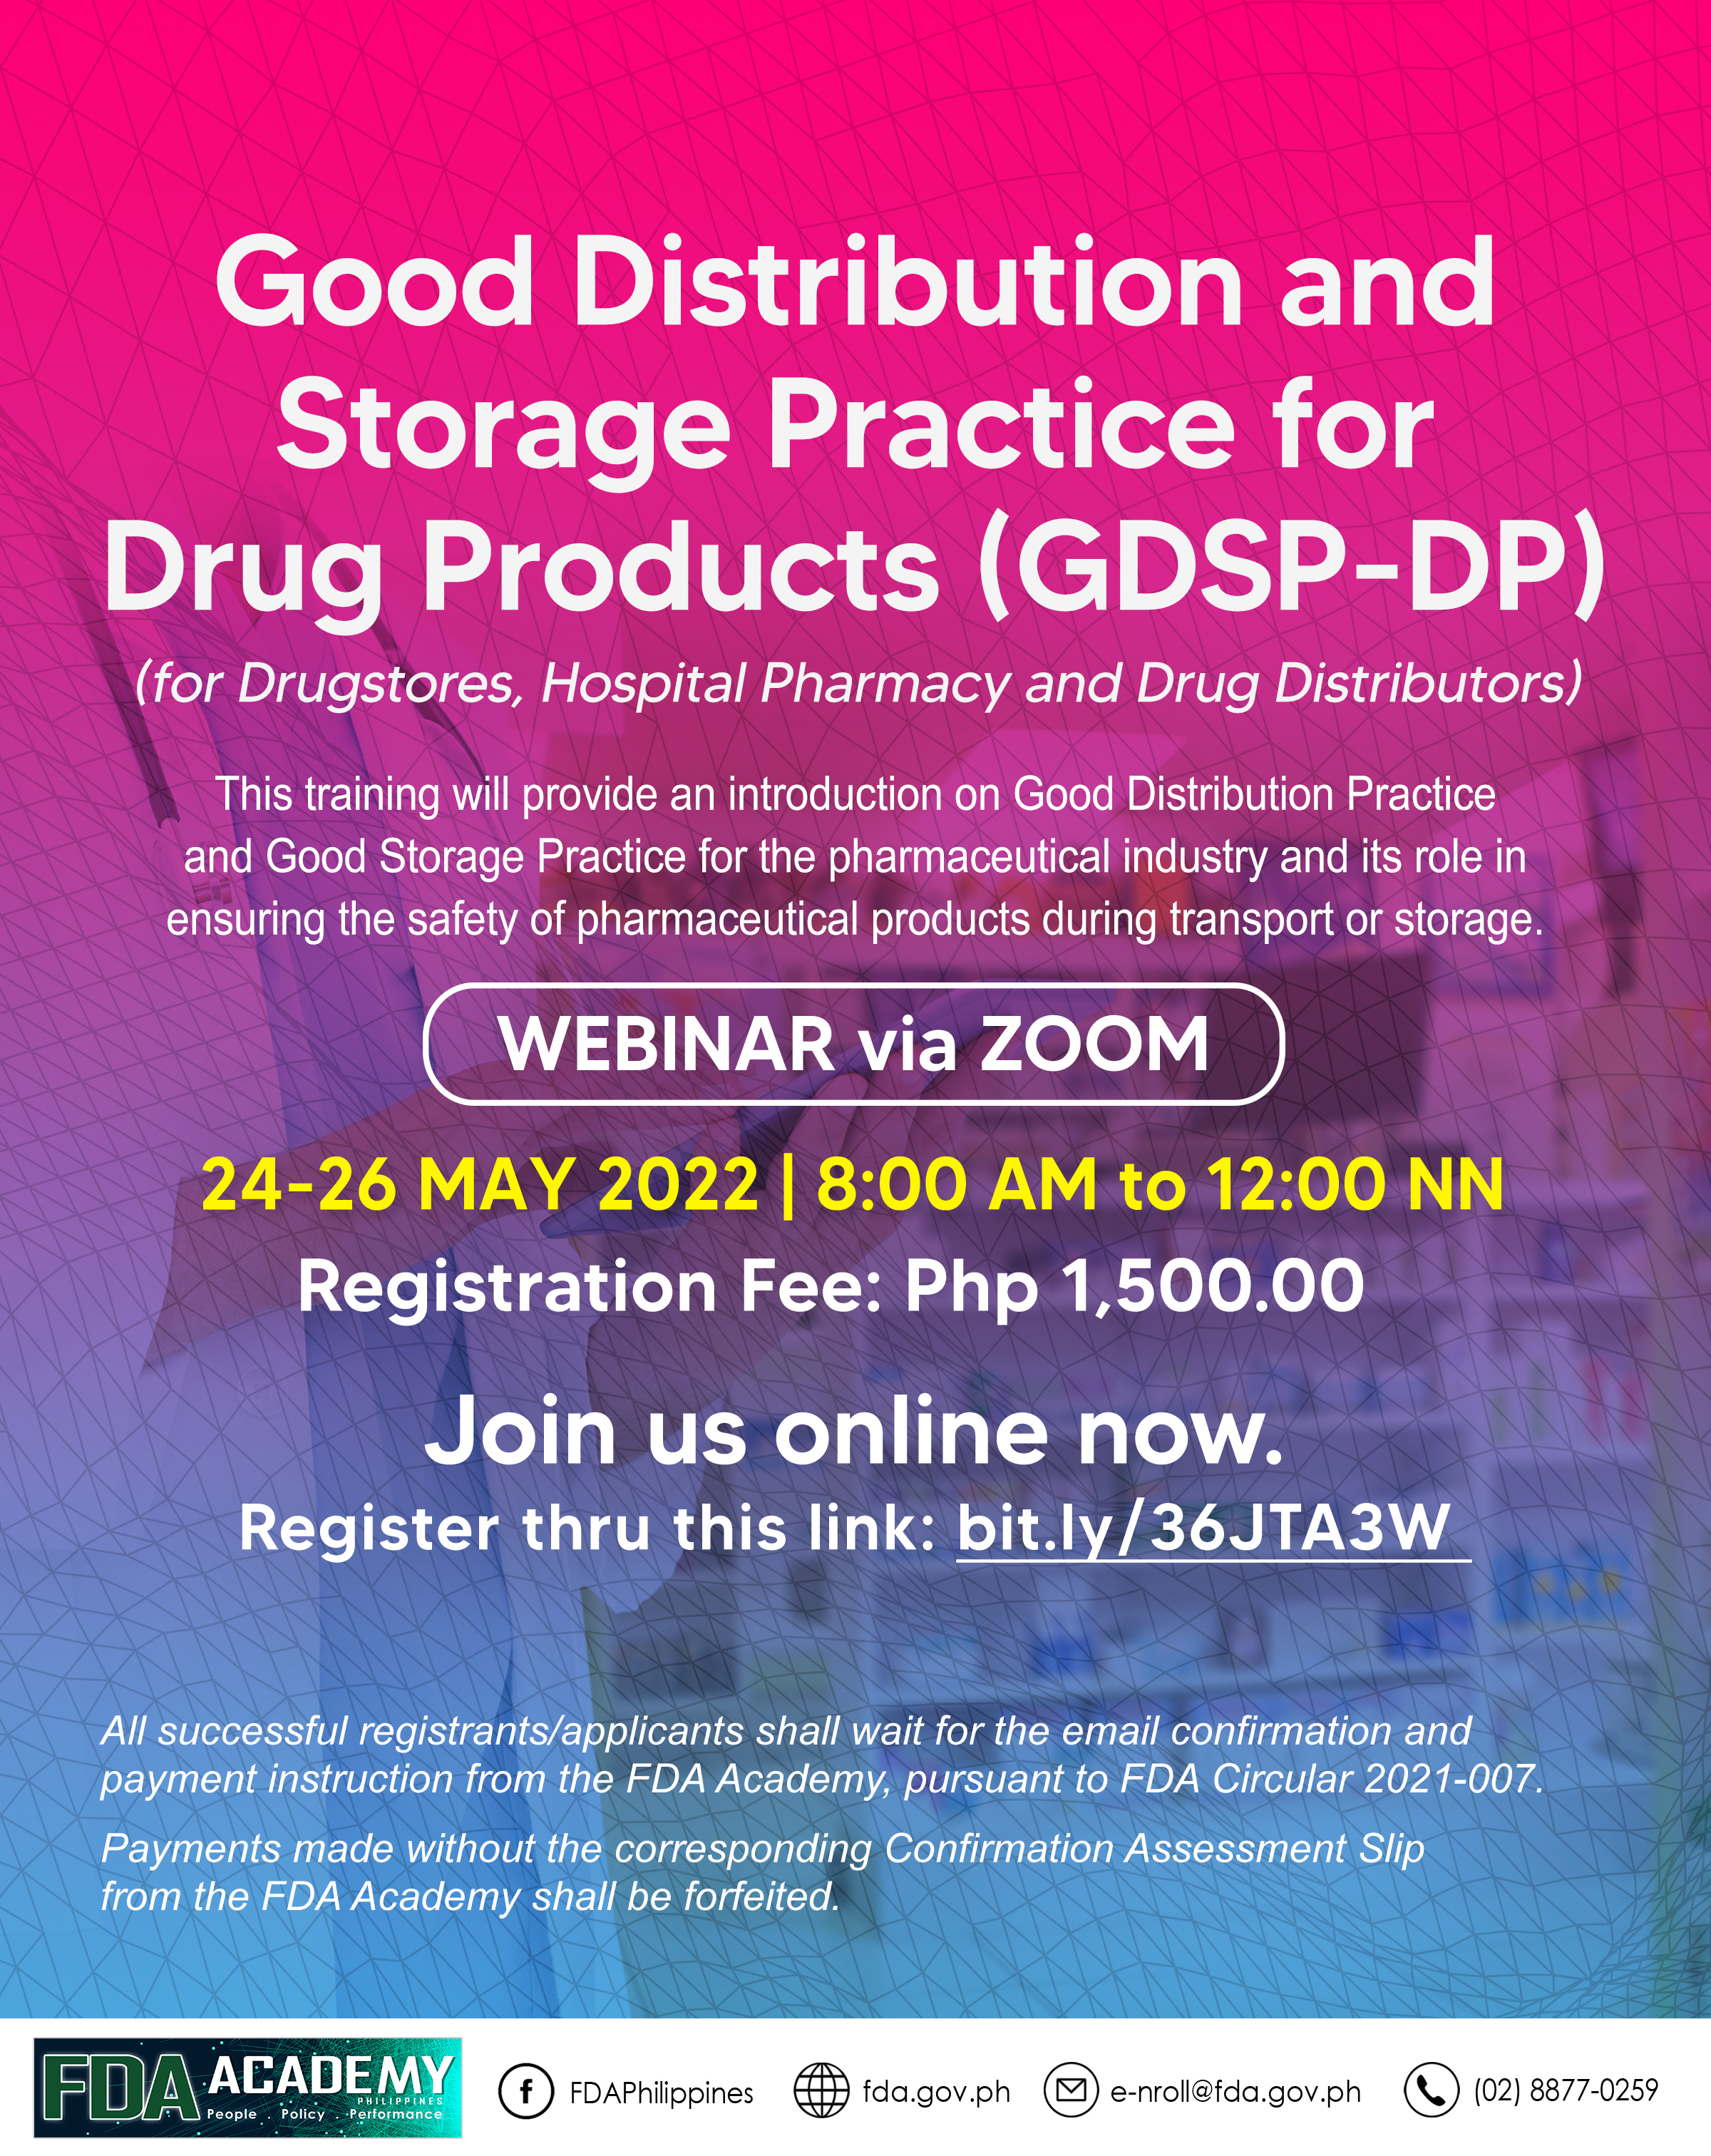 Announcement || GOOD DISTRIBUTION AND STORAGE PRACTICE FOR DRUG PRODUCTS (FOR DRUGSTORES, HOSPITAL PHARMACY AND DRUG DISTRIBUTORS) – (GDSP-DP)